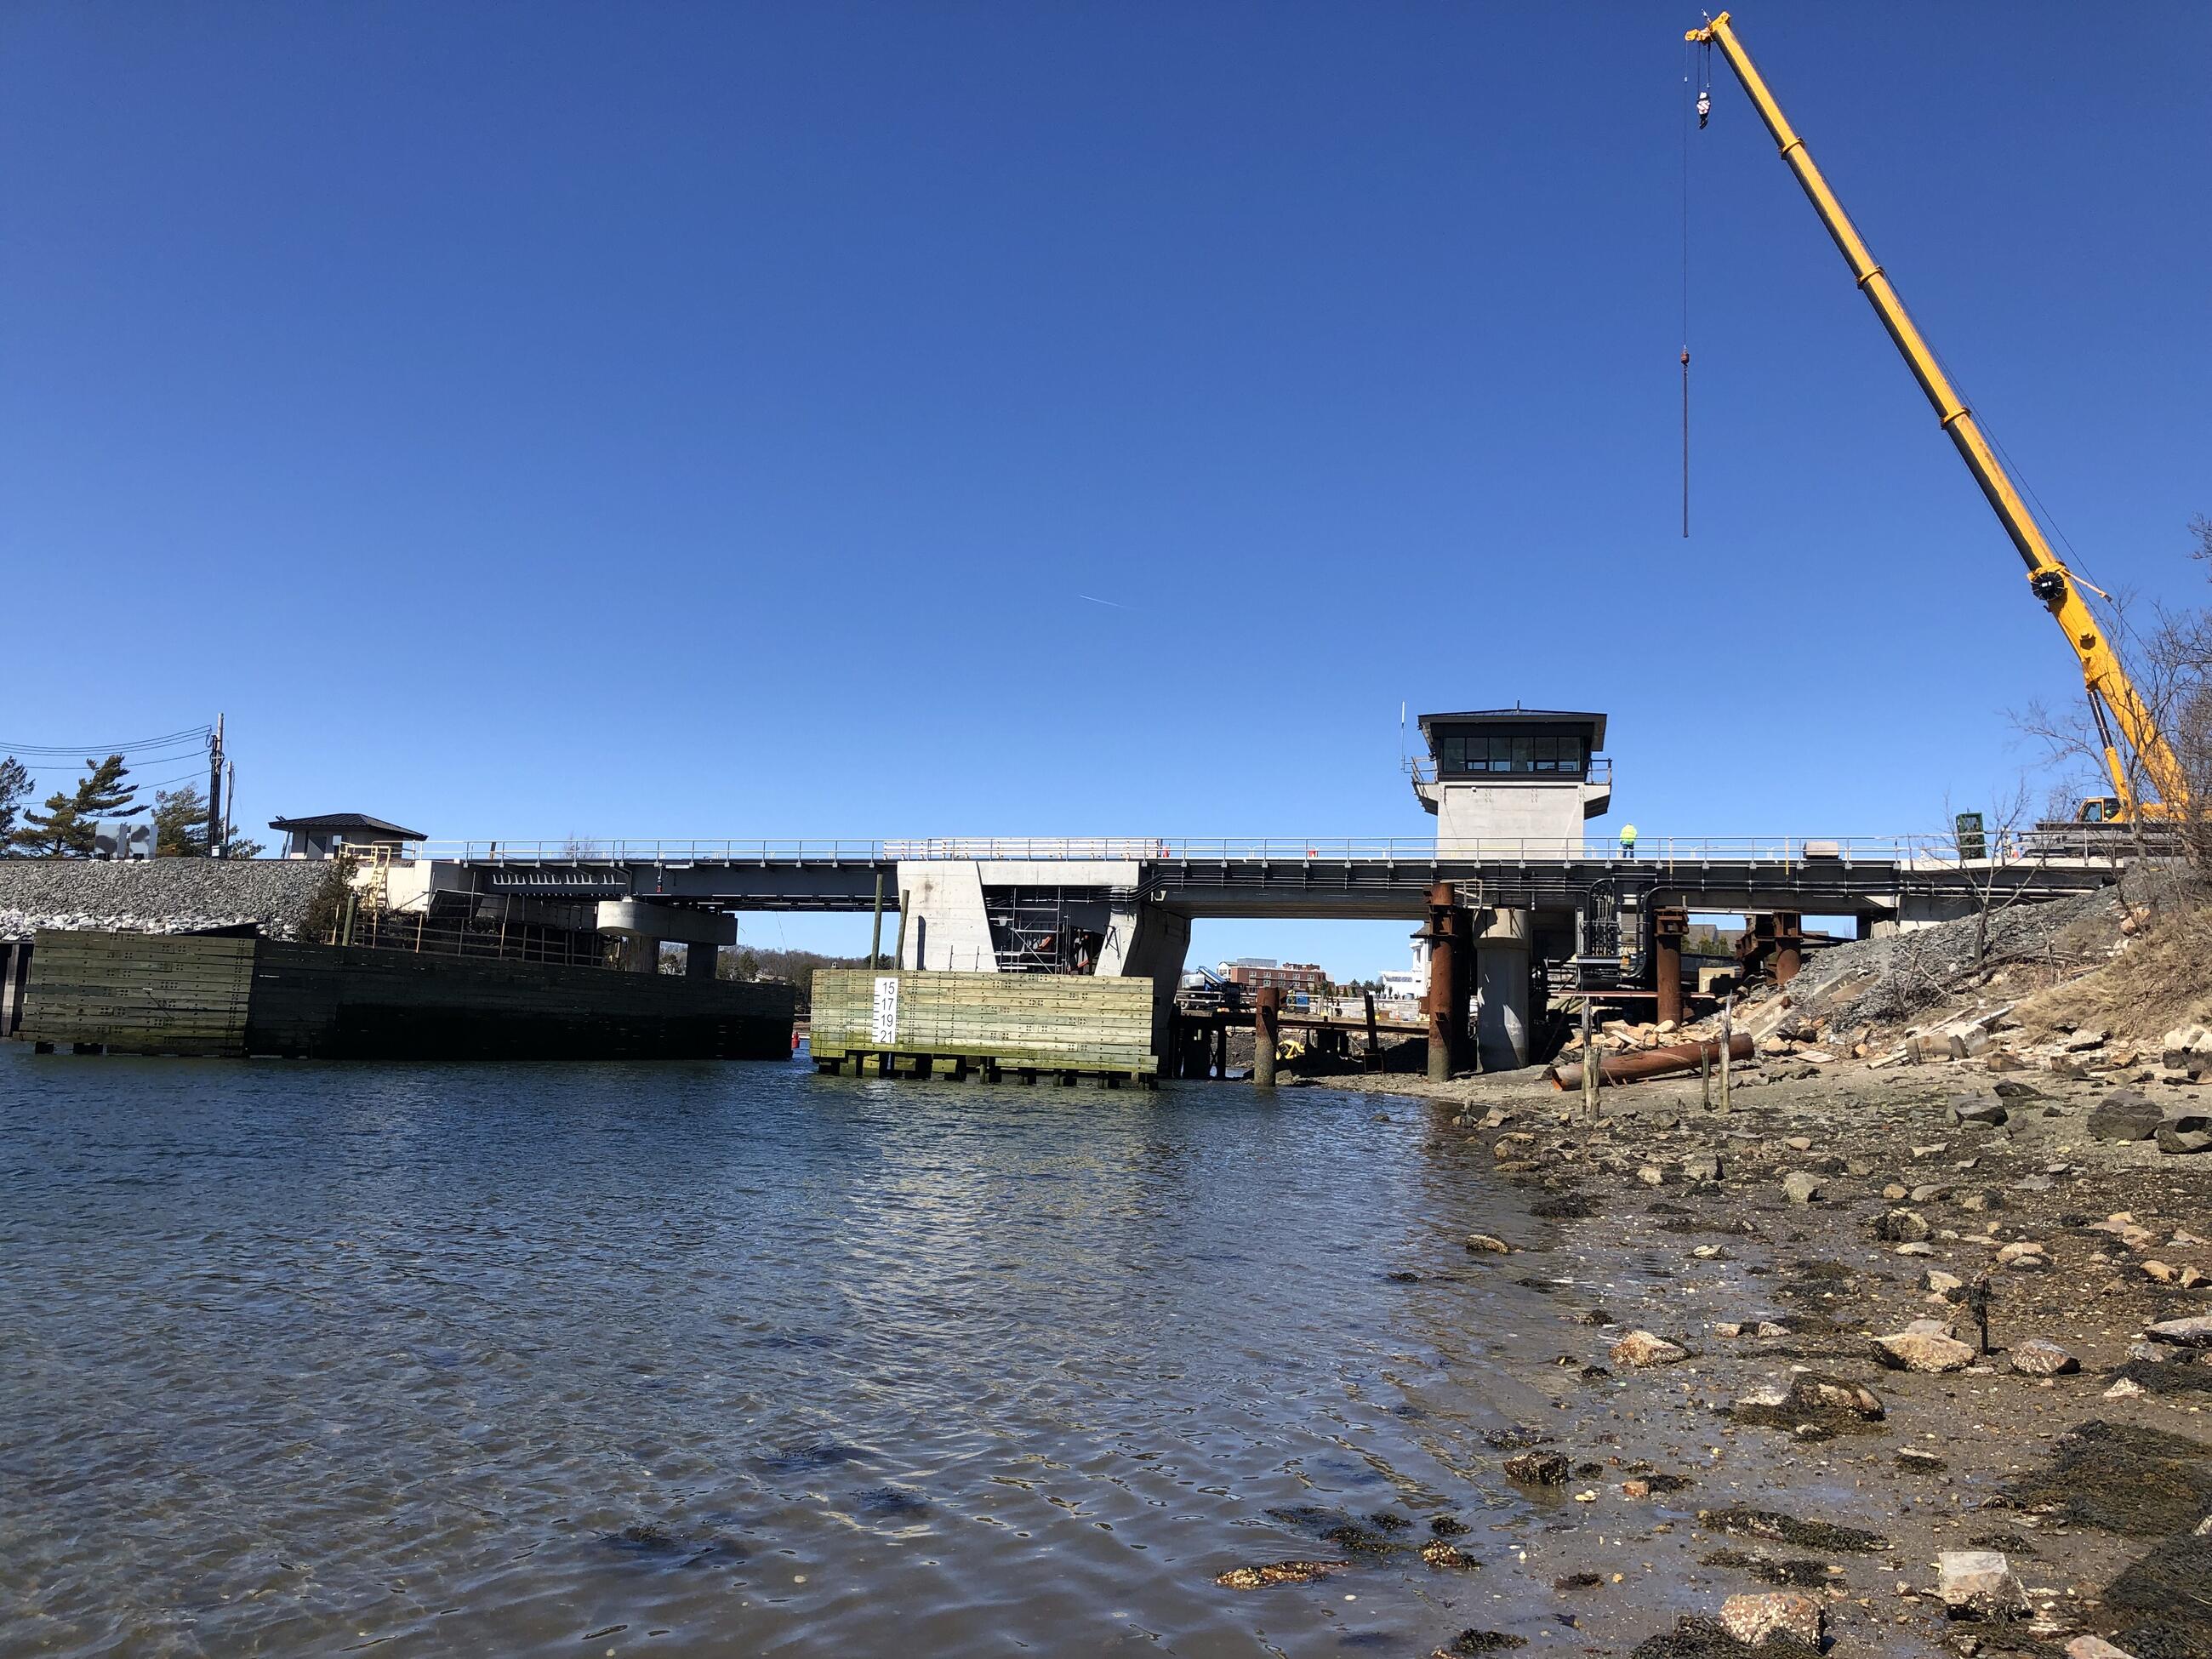 A wide view of the entire Gloucester Drawbridge under construction as seen in March 2022. A crane is at right suspending a long metal object in the air to the right of the control tower. At center bottom is the waterway over which the bridge spans. The bridge is in the middle distance under a dark blue sky. Both approaches to the bridge appear on either side of the photo.